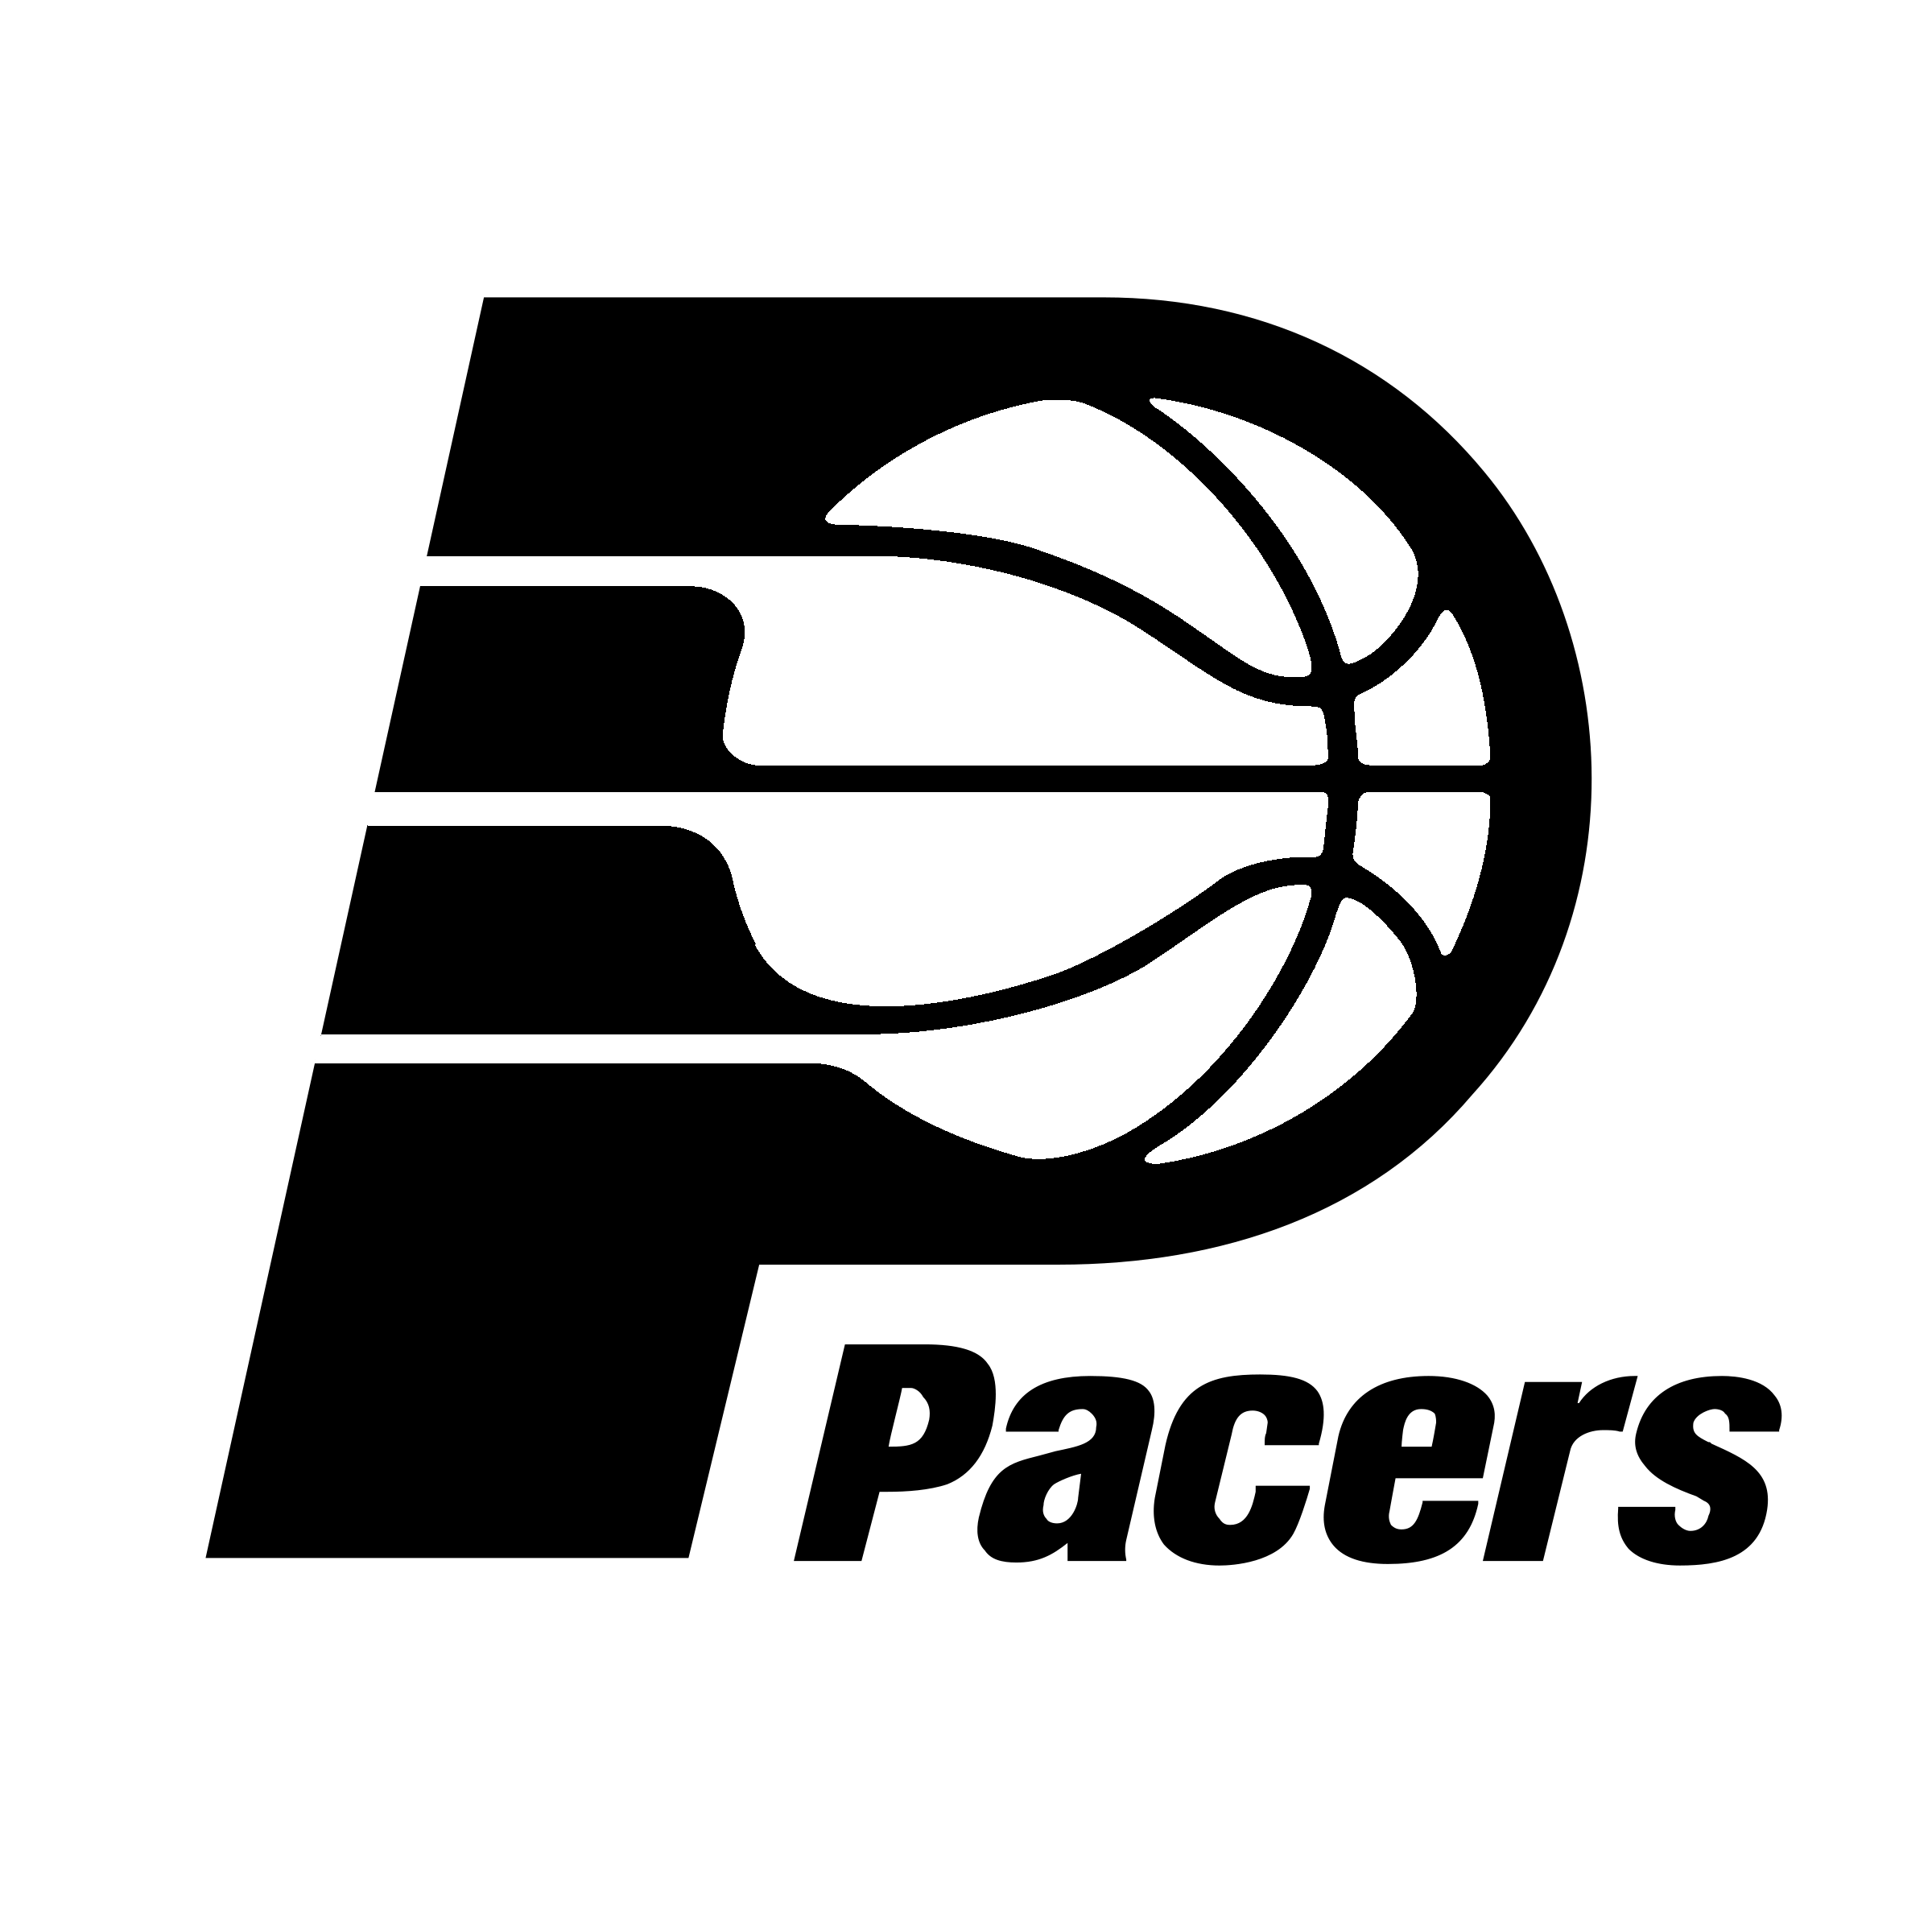 White Indiana Logo - Indiana Pacers Logo SVG Vector & PNG Transparent Logo Supply